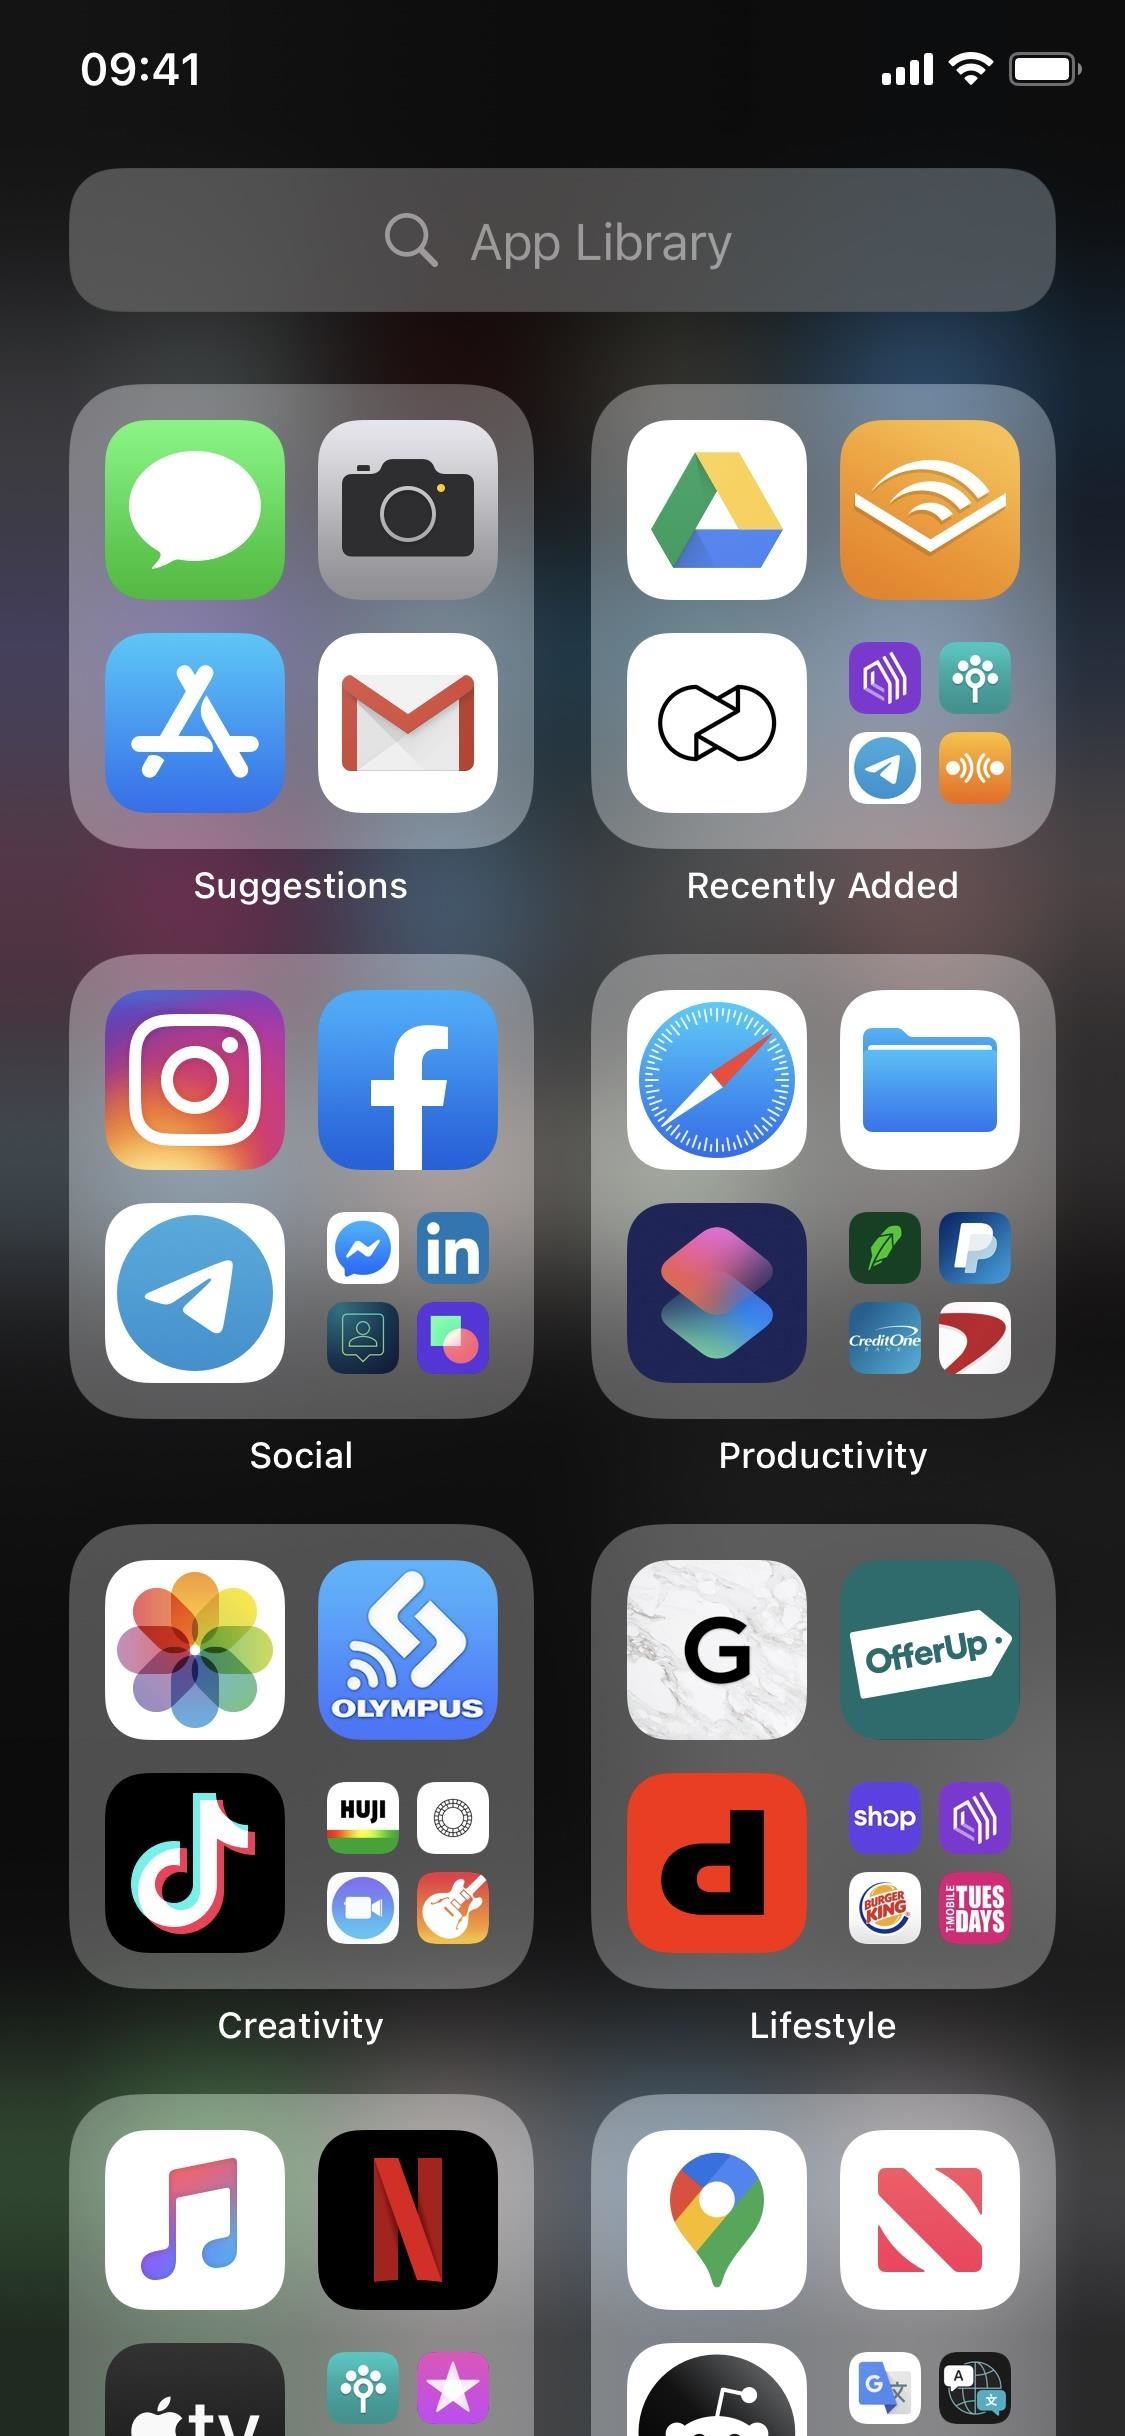 How to Hide Entire Home Screen Pages on Your iPhone in iOS 14 for a Simpler Layout